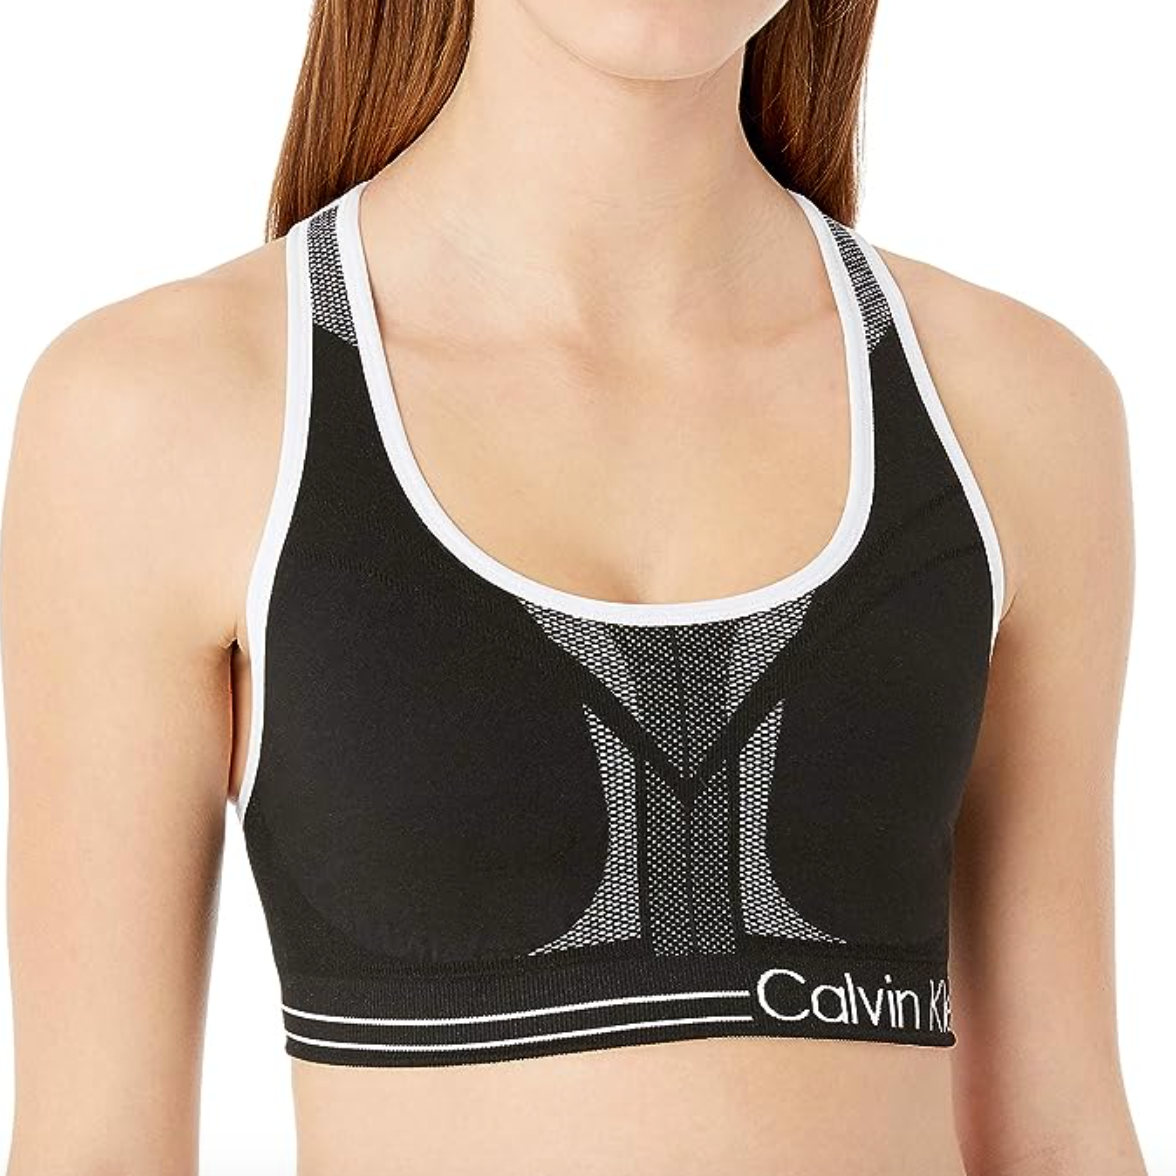 Calvin Klein\'s Iconic Underwear for Off and at Now Women Is Tonight Men Amazon Up 60% | Right Entertainment to